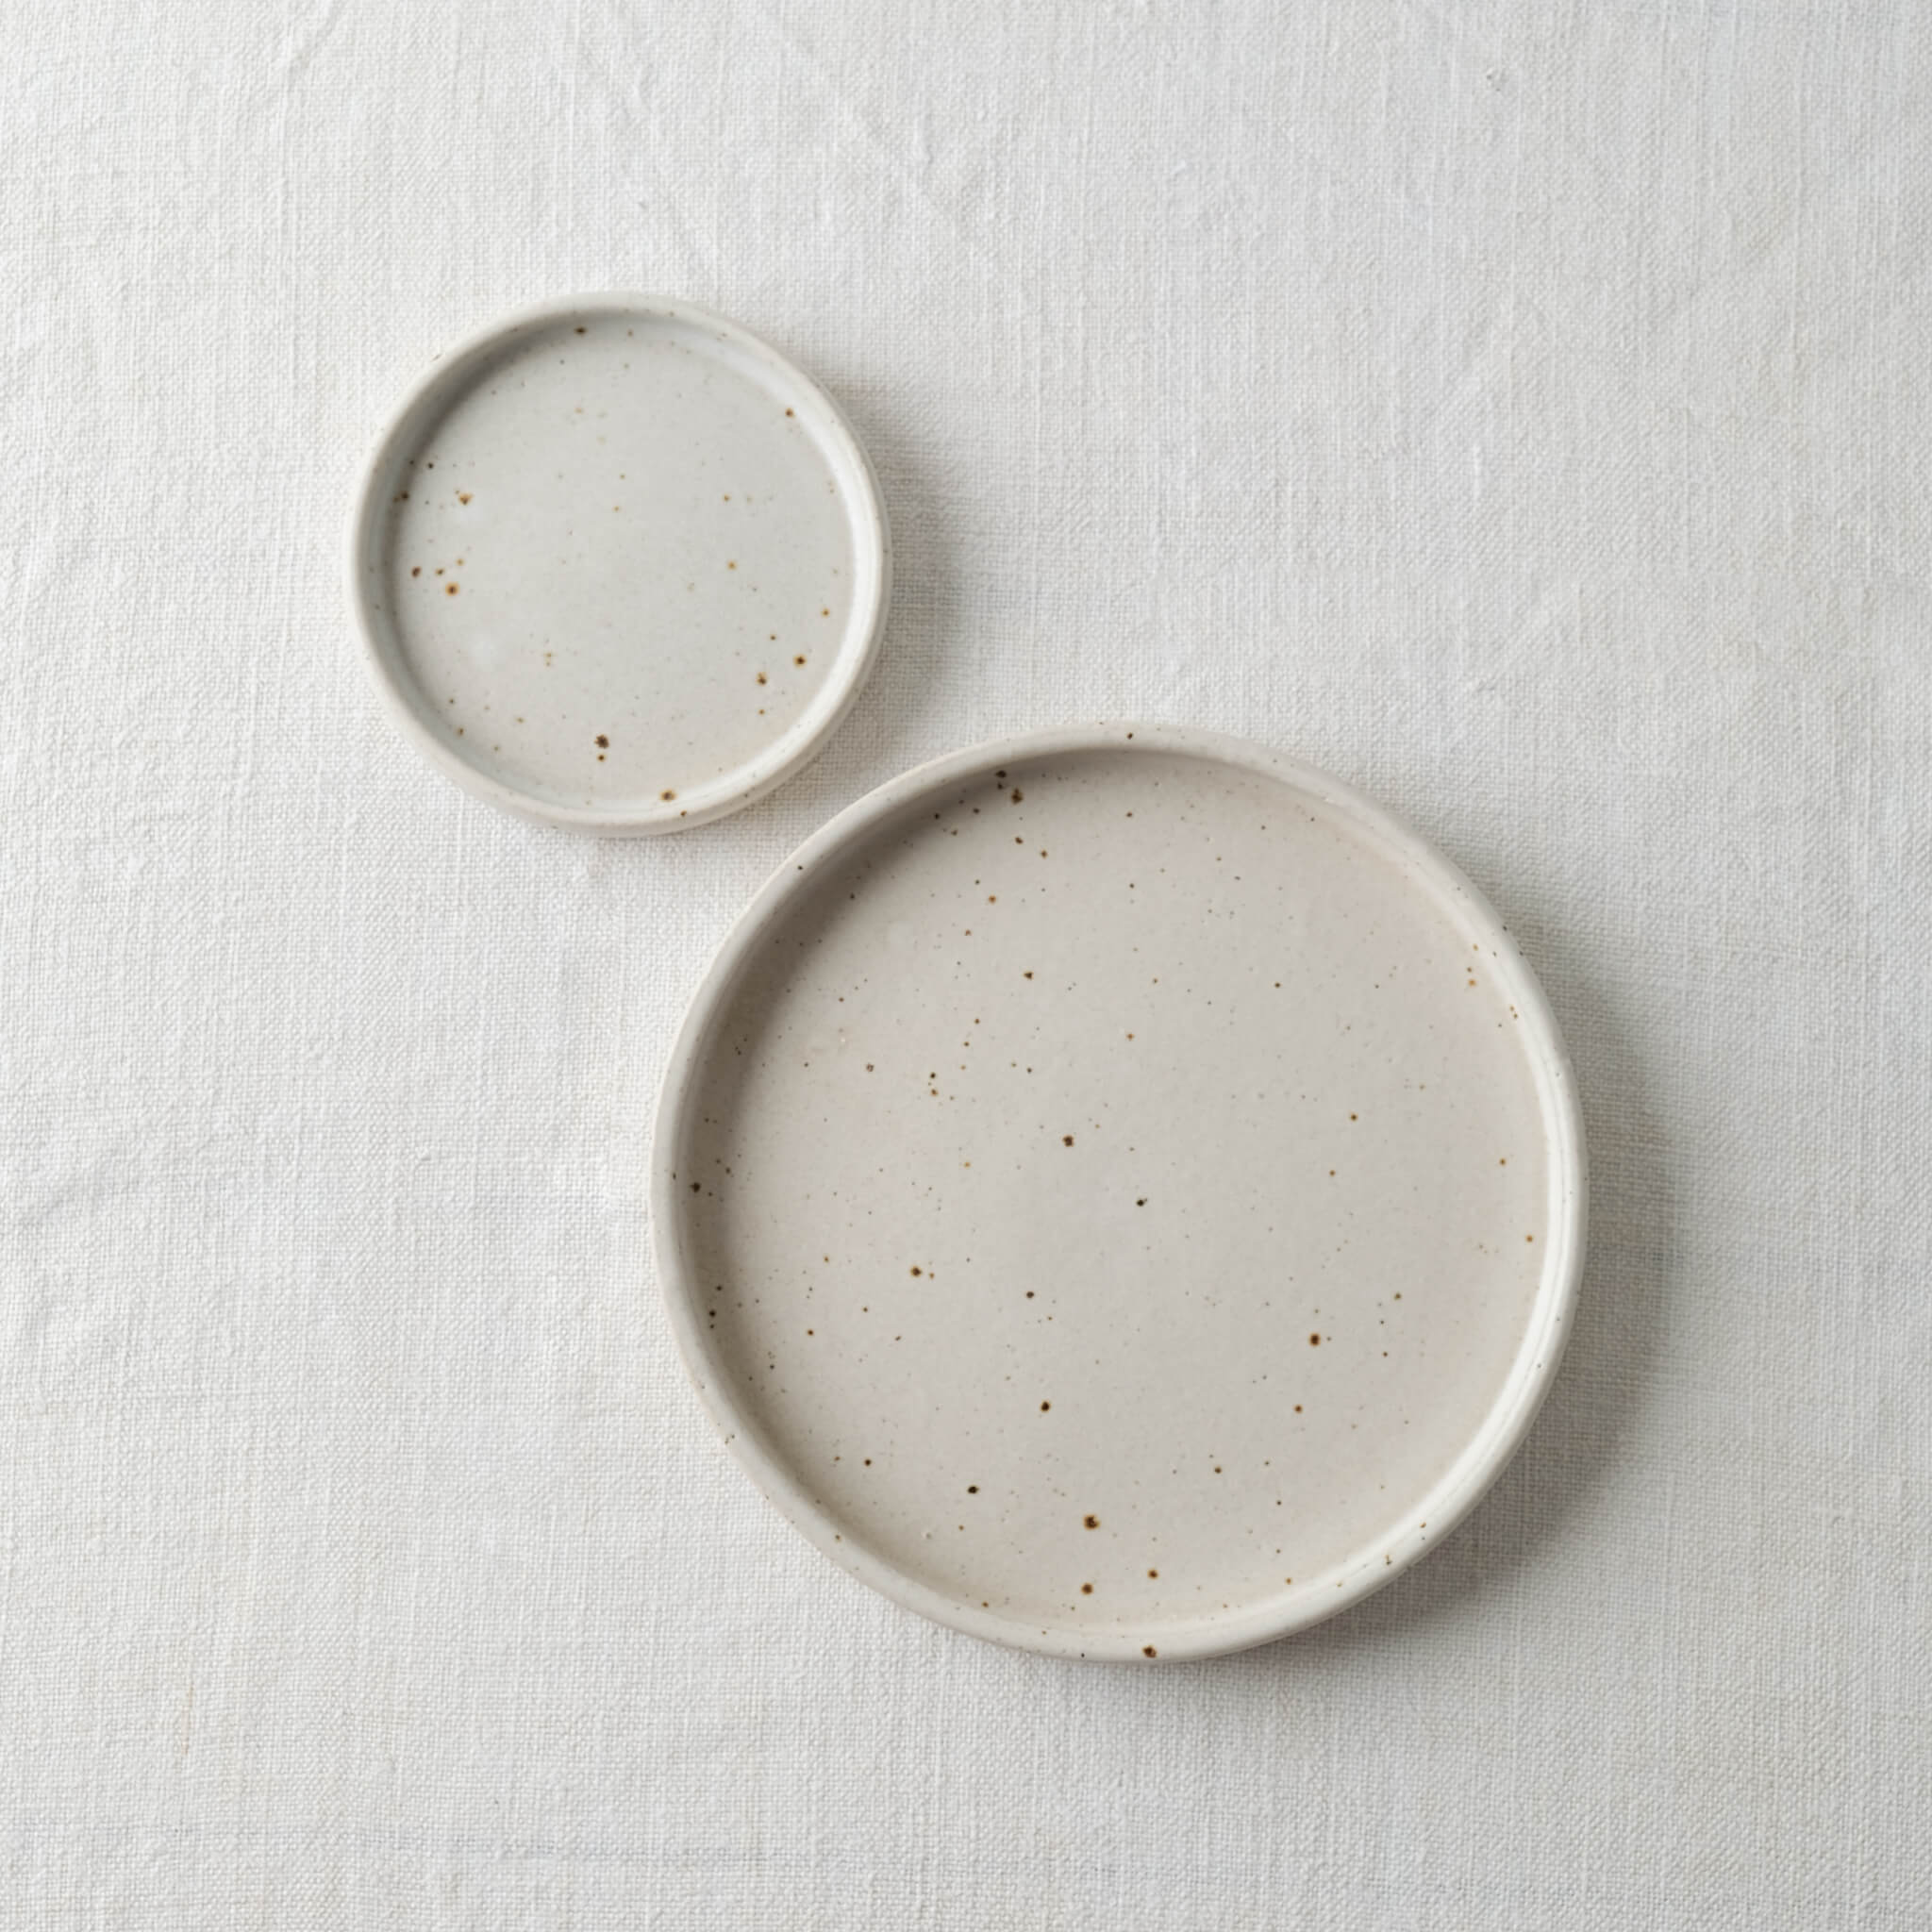 Dor & Tan Pinch Dish - Matte White & Speckled with co ordinating Cake Plate